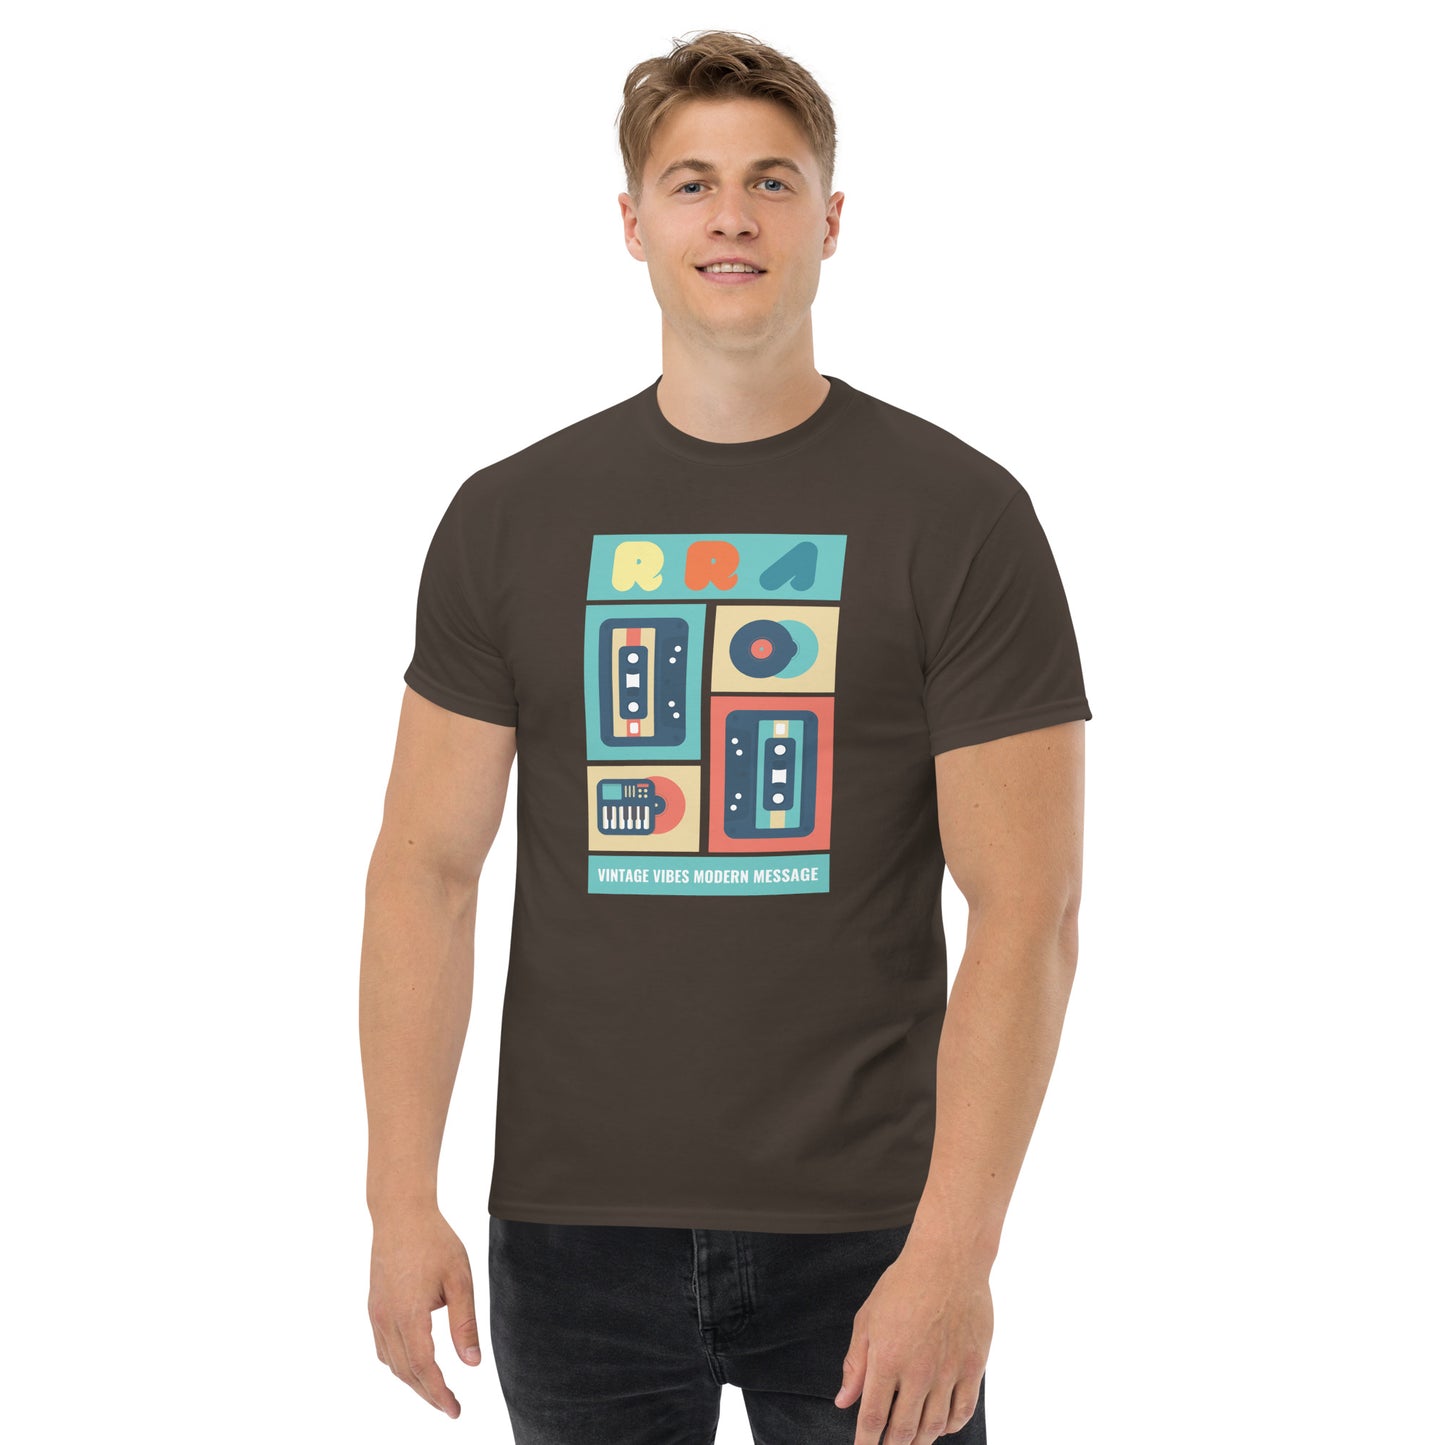 RRA Vintage Vibes Modern Message Cassettes and Vinyl Men's classic tee